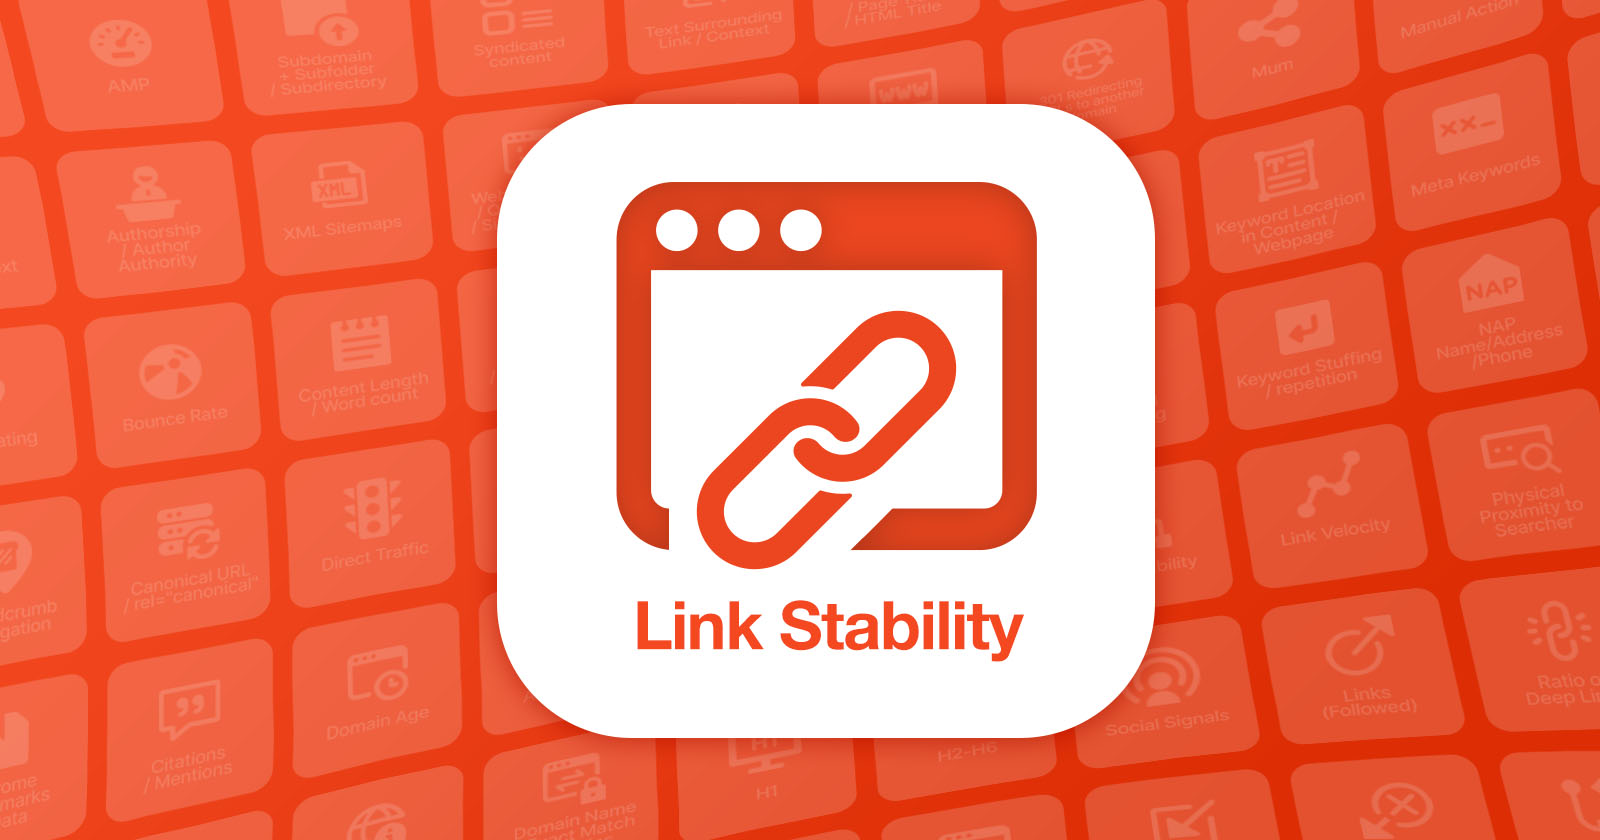 Link Stability